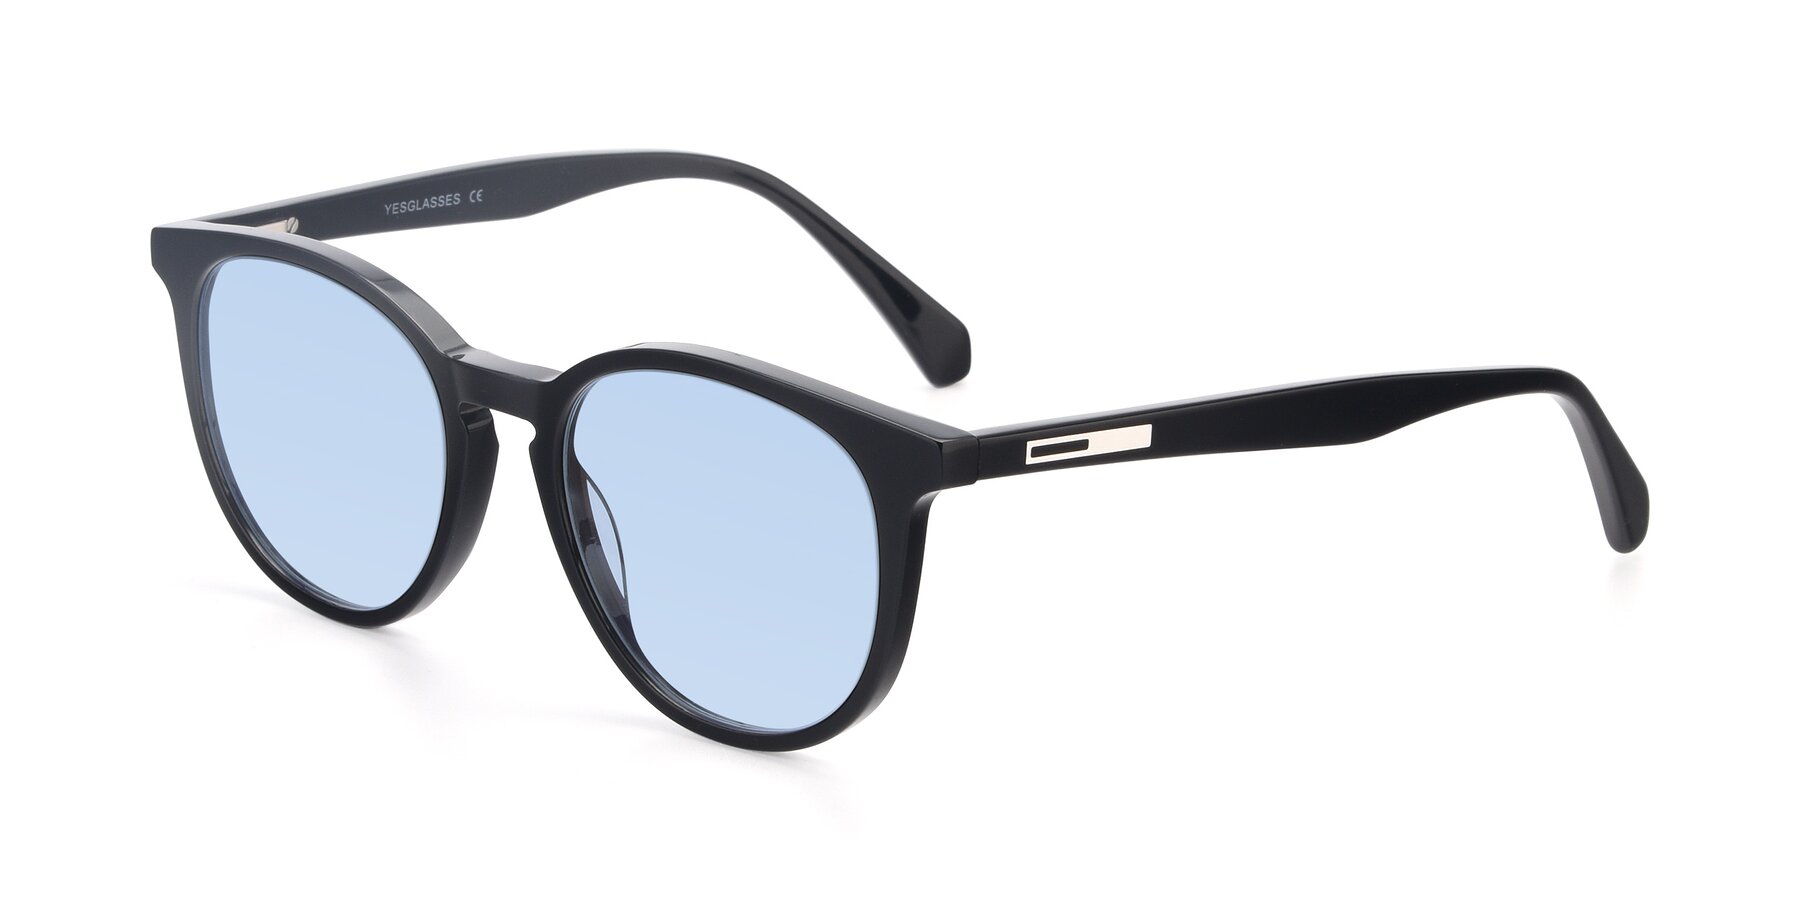 Angle of 17721 in Black with Light Blue Tinted Lenses